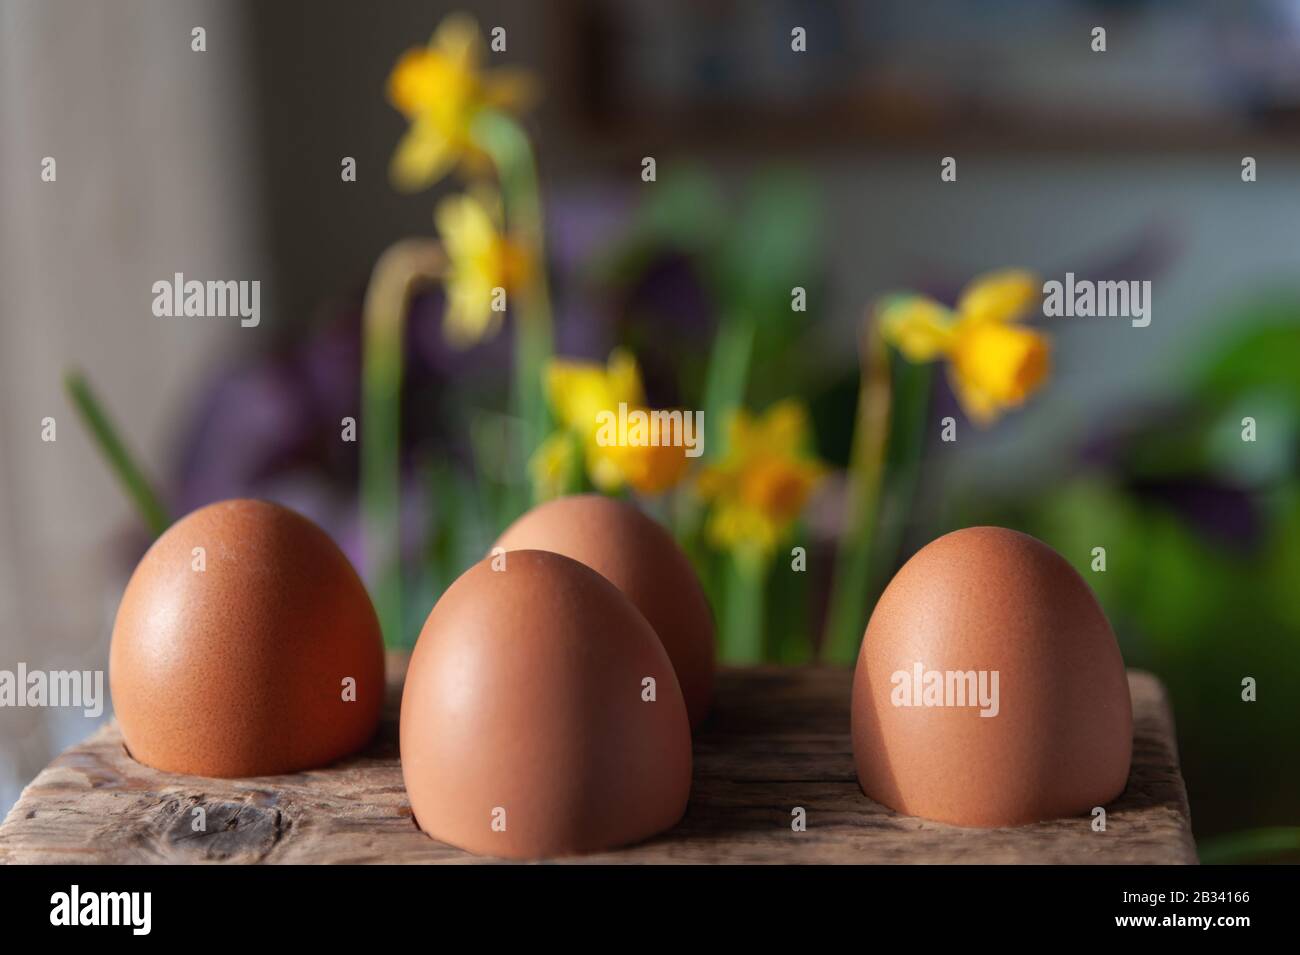 Eggs sitting in a wooden holder in front of miniature daffodils. Stock Photo